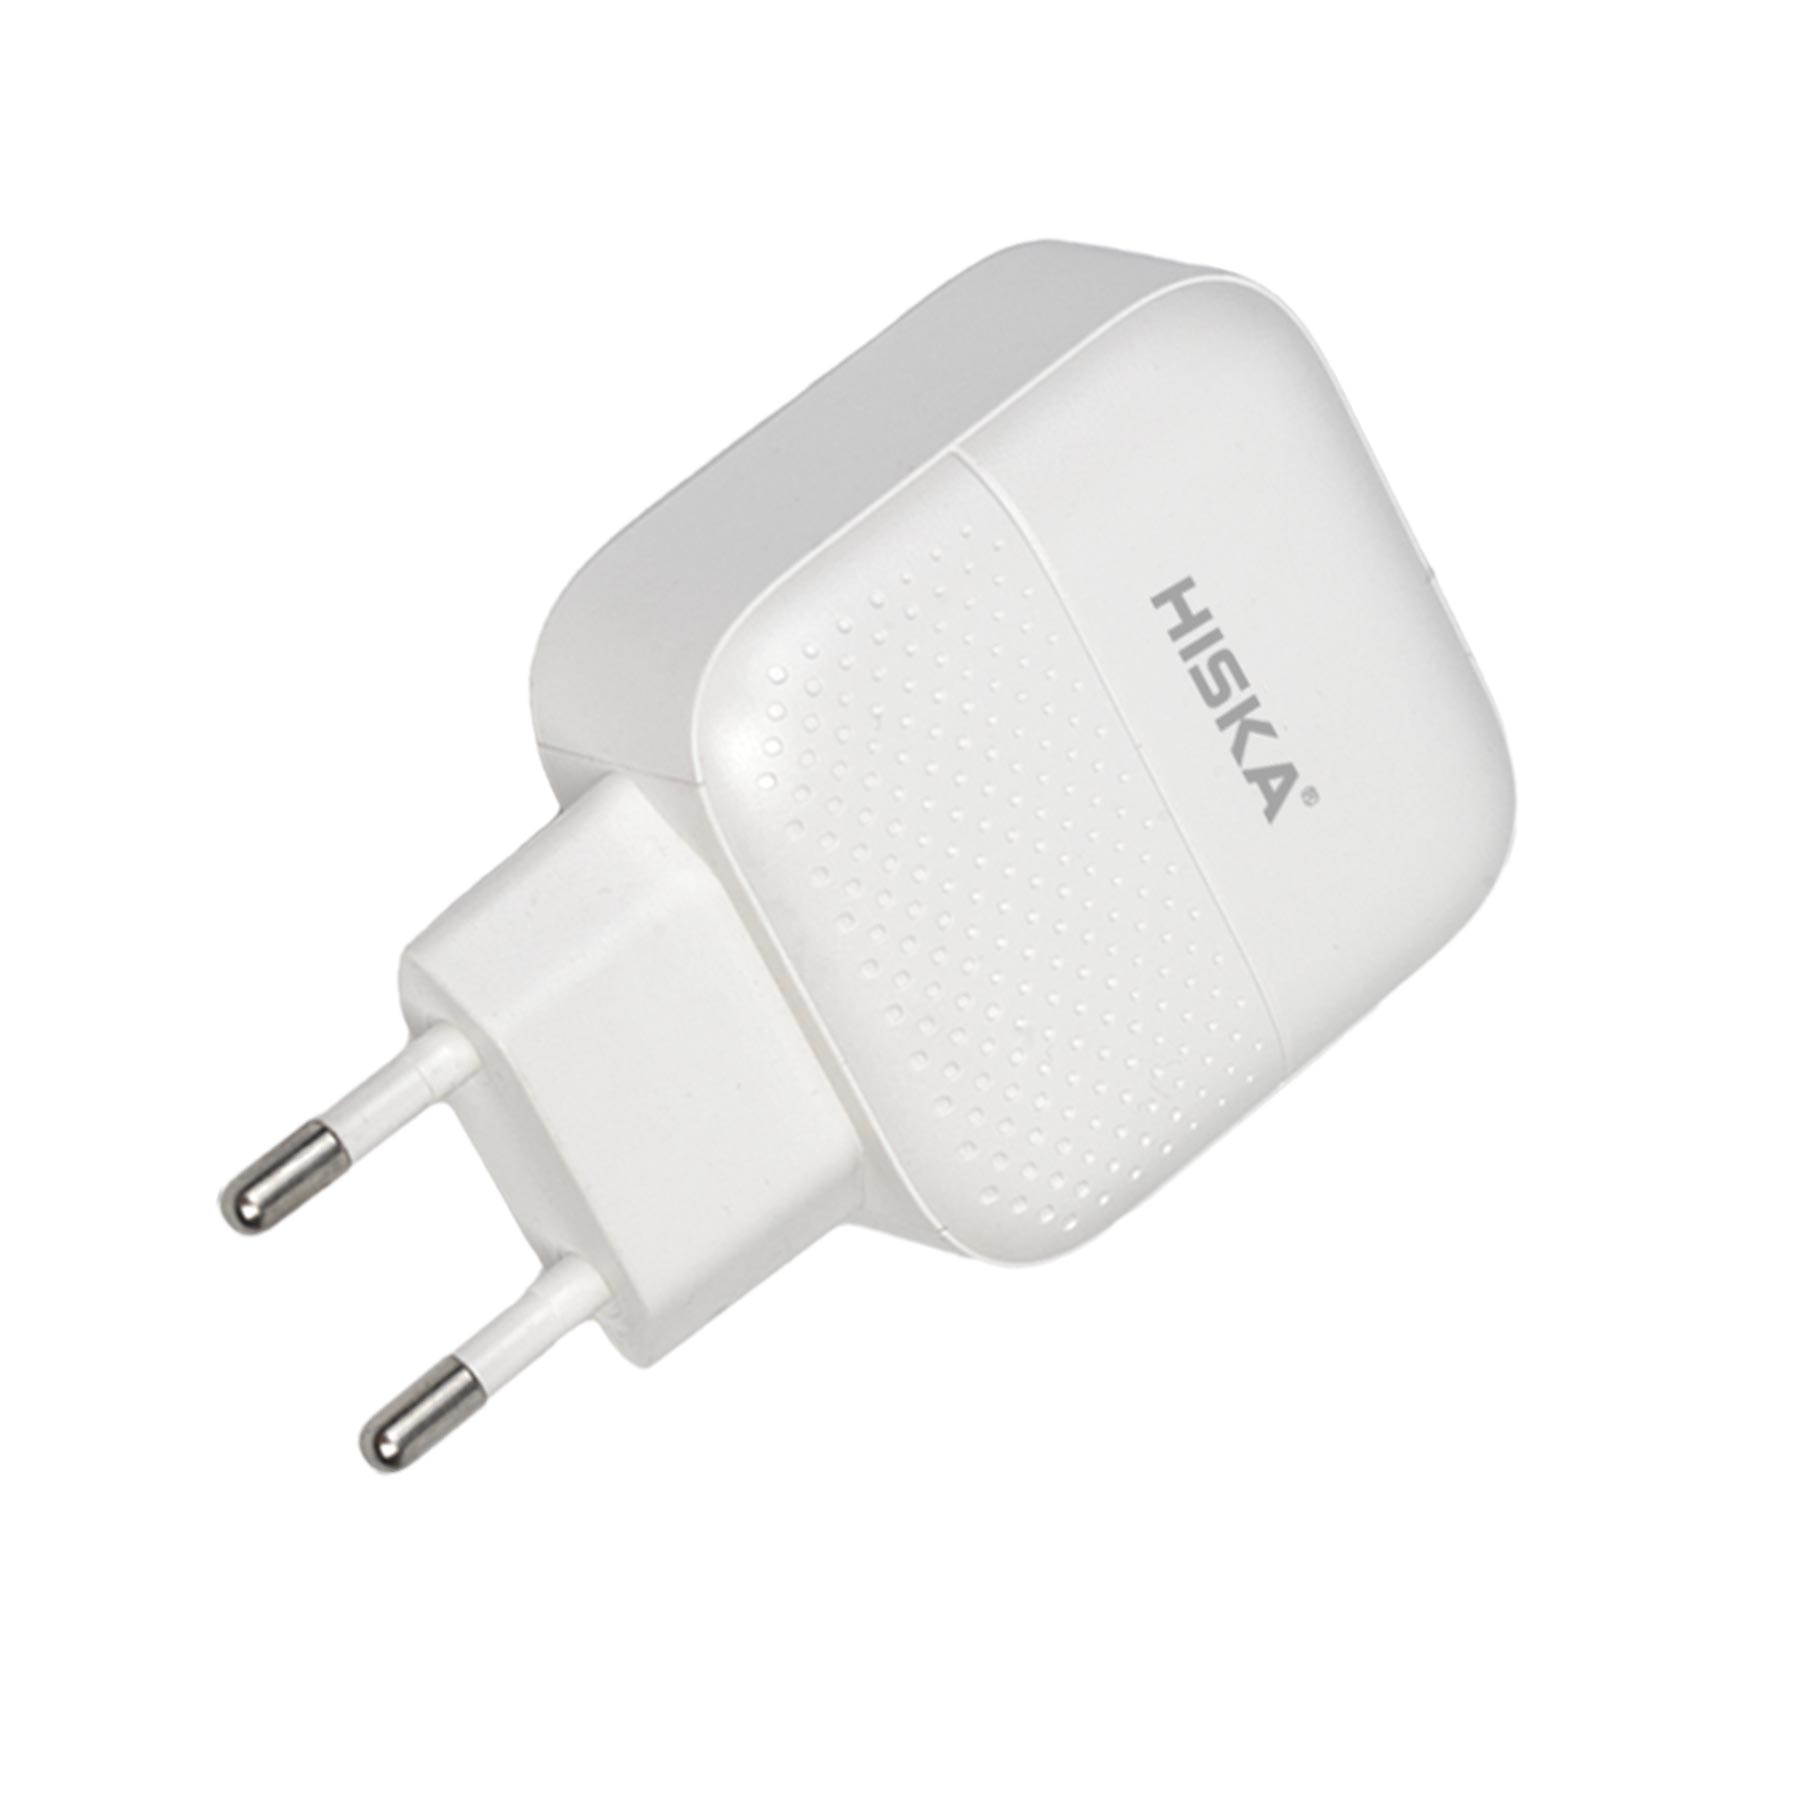 HK-2103 Wall charger H-111Q